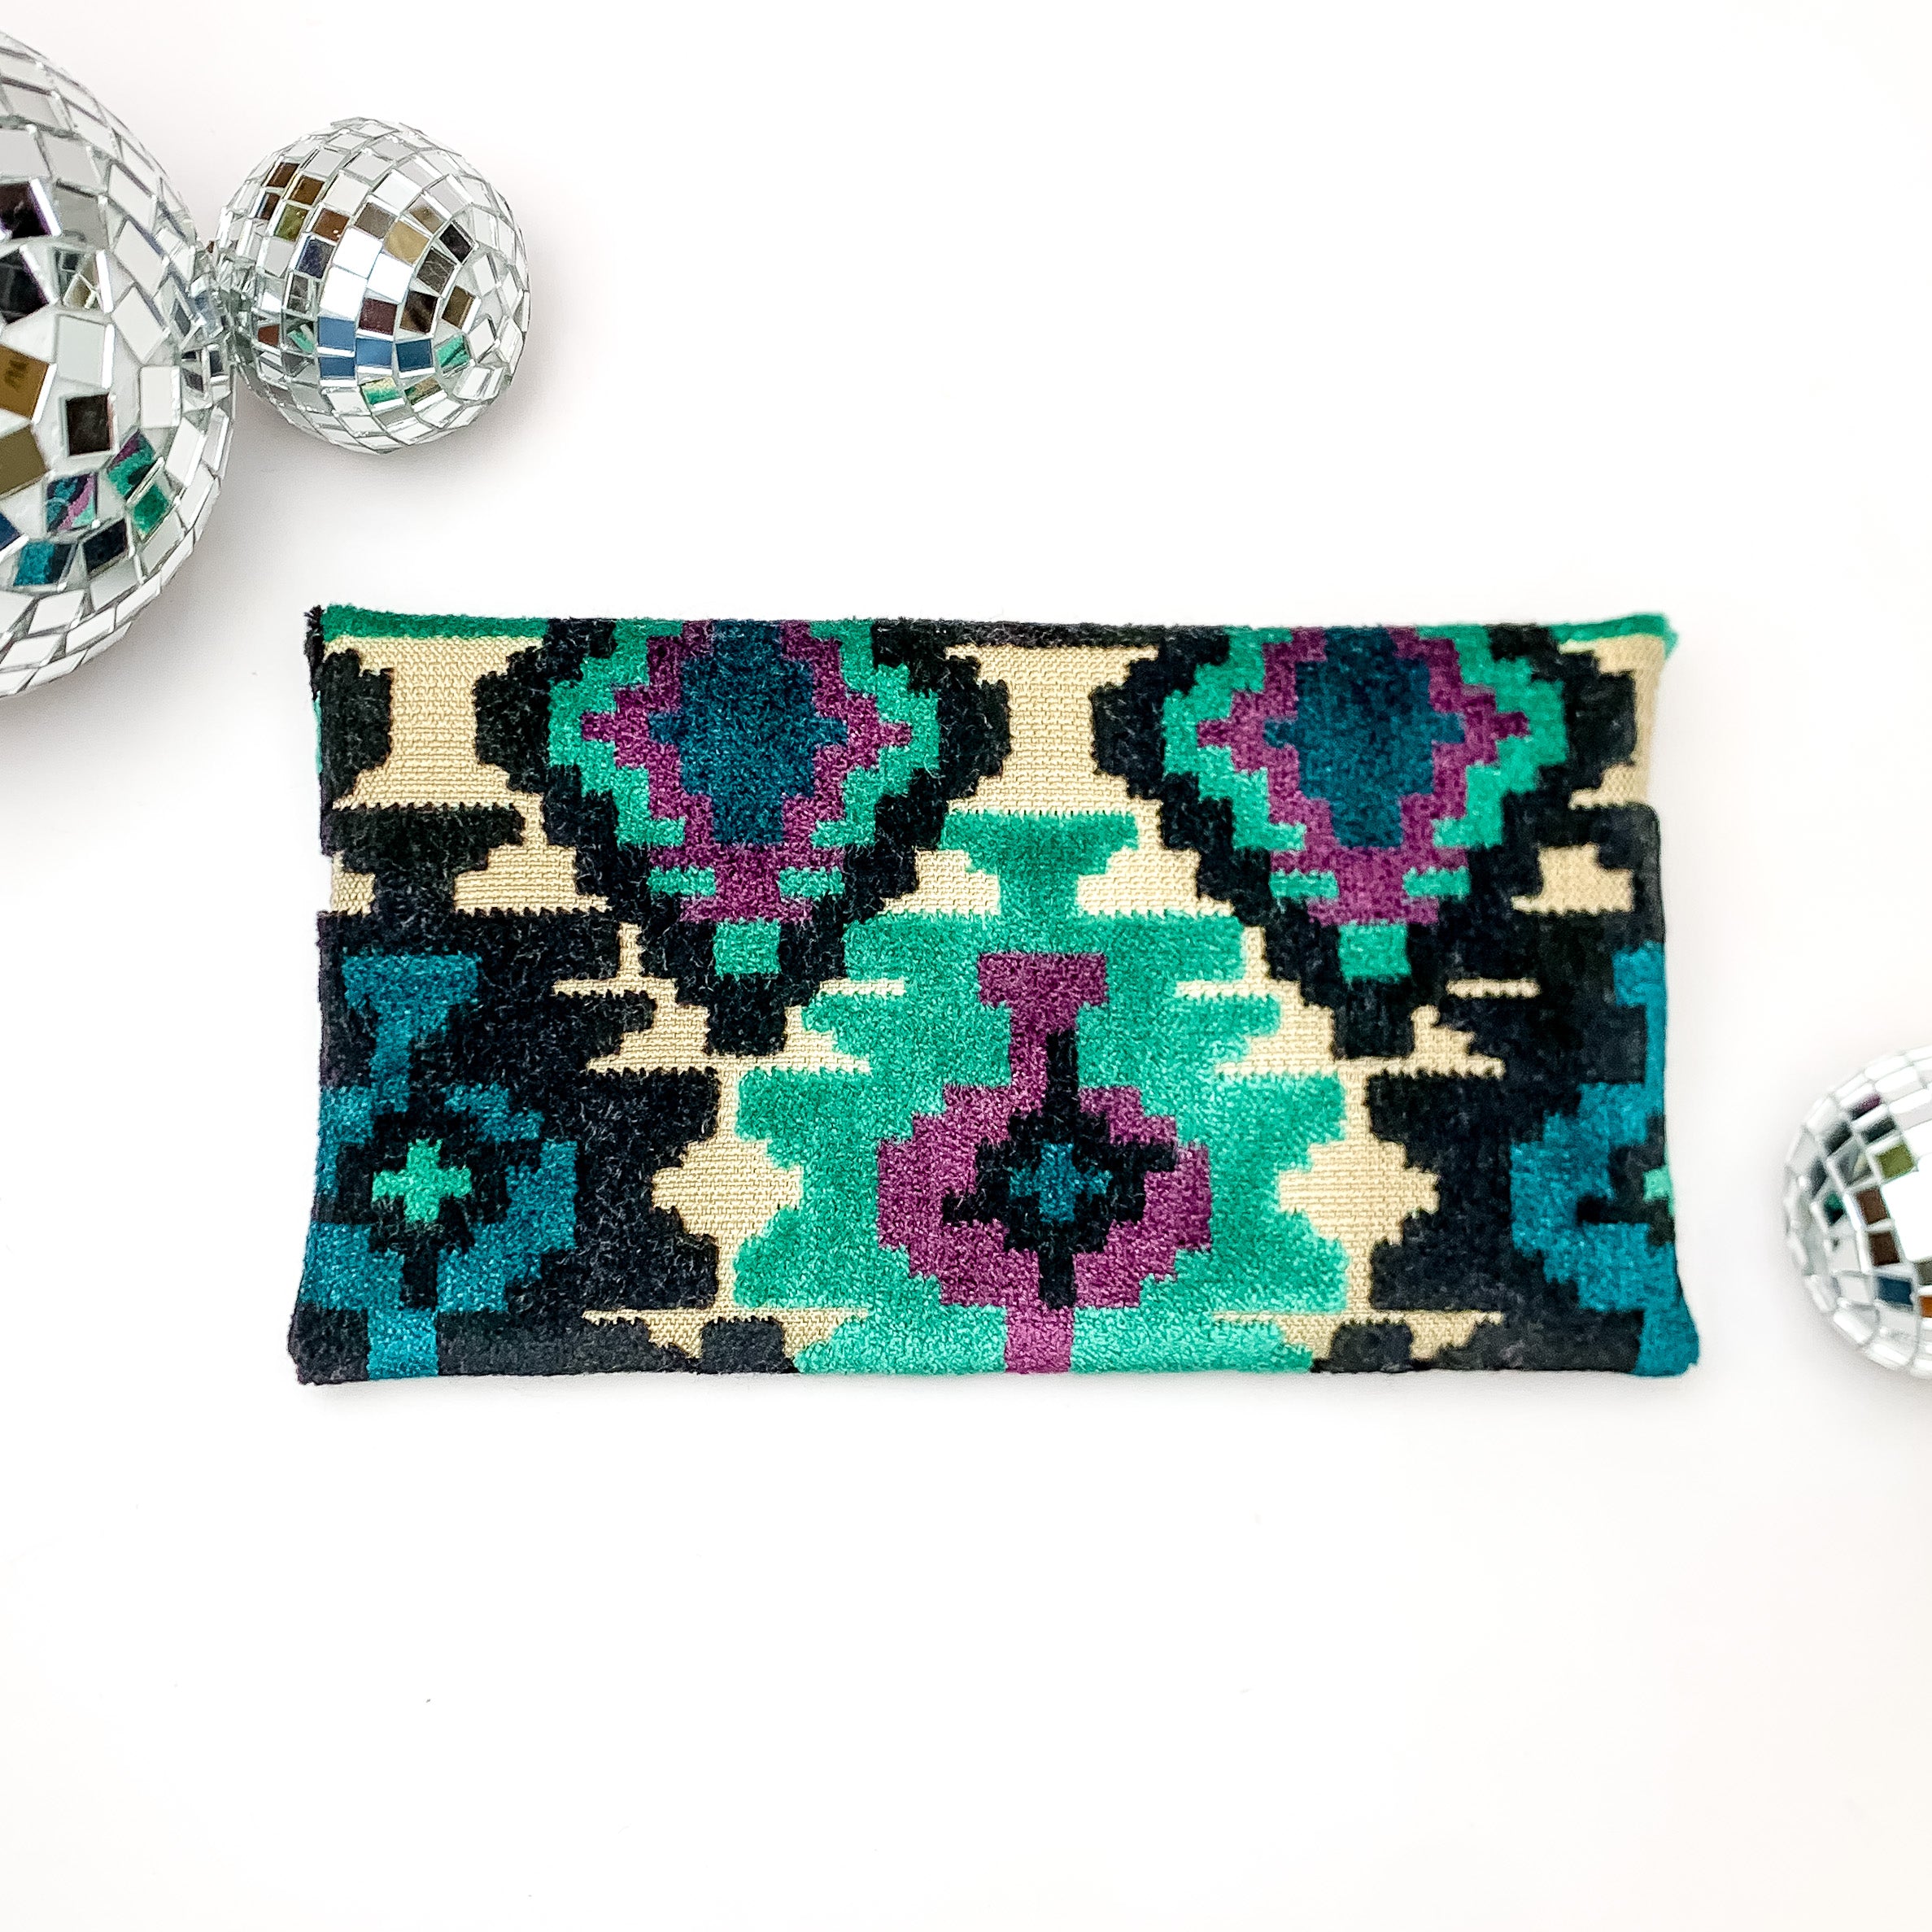 Makeup Junkie | Mini Midnight Aztec Lay Flat Bag in Turquoise Green and Black Mix